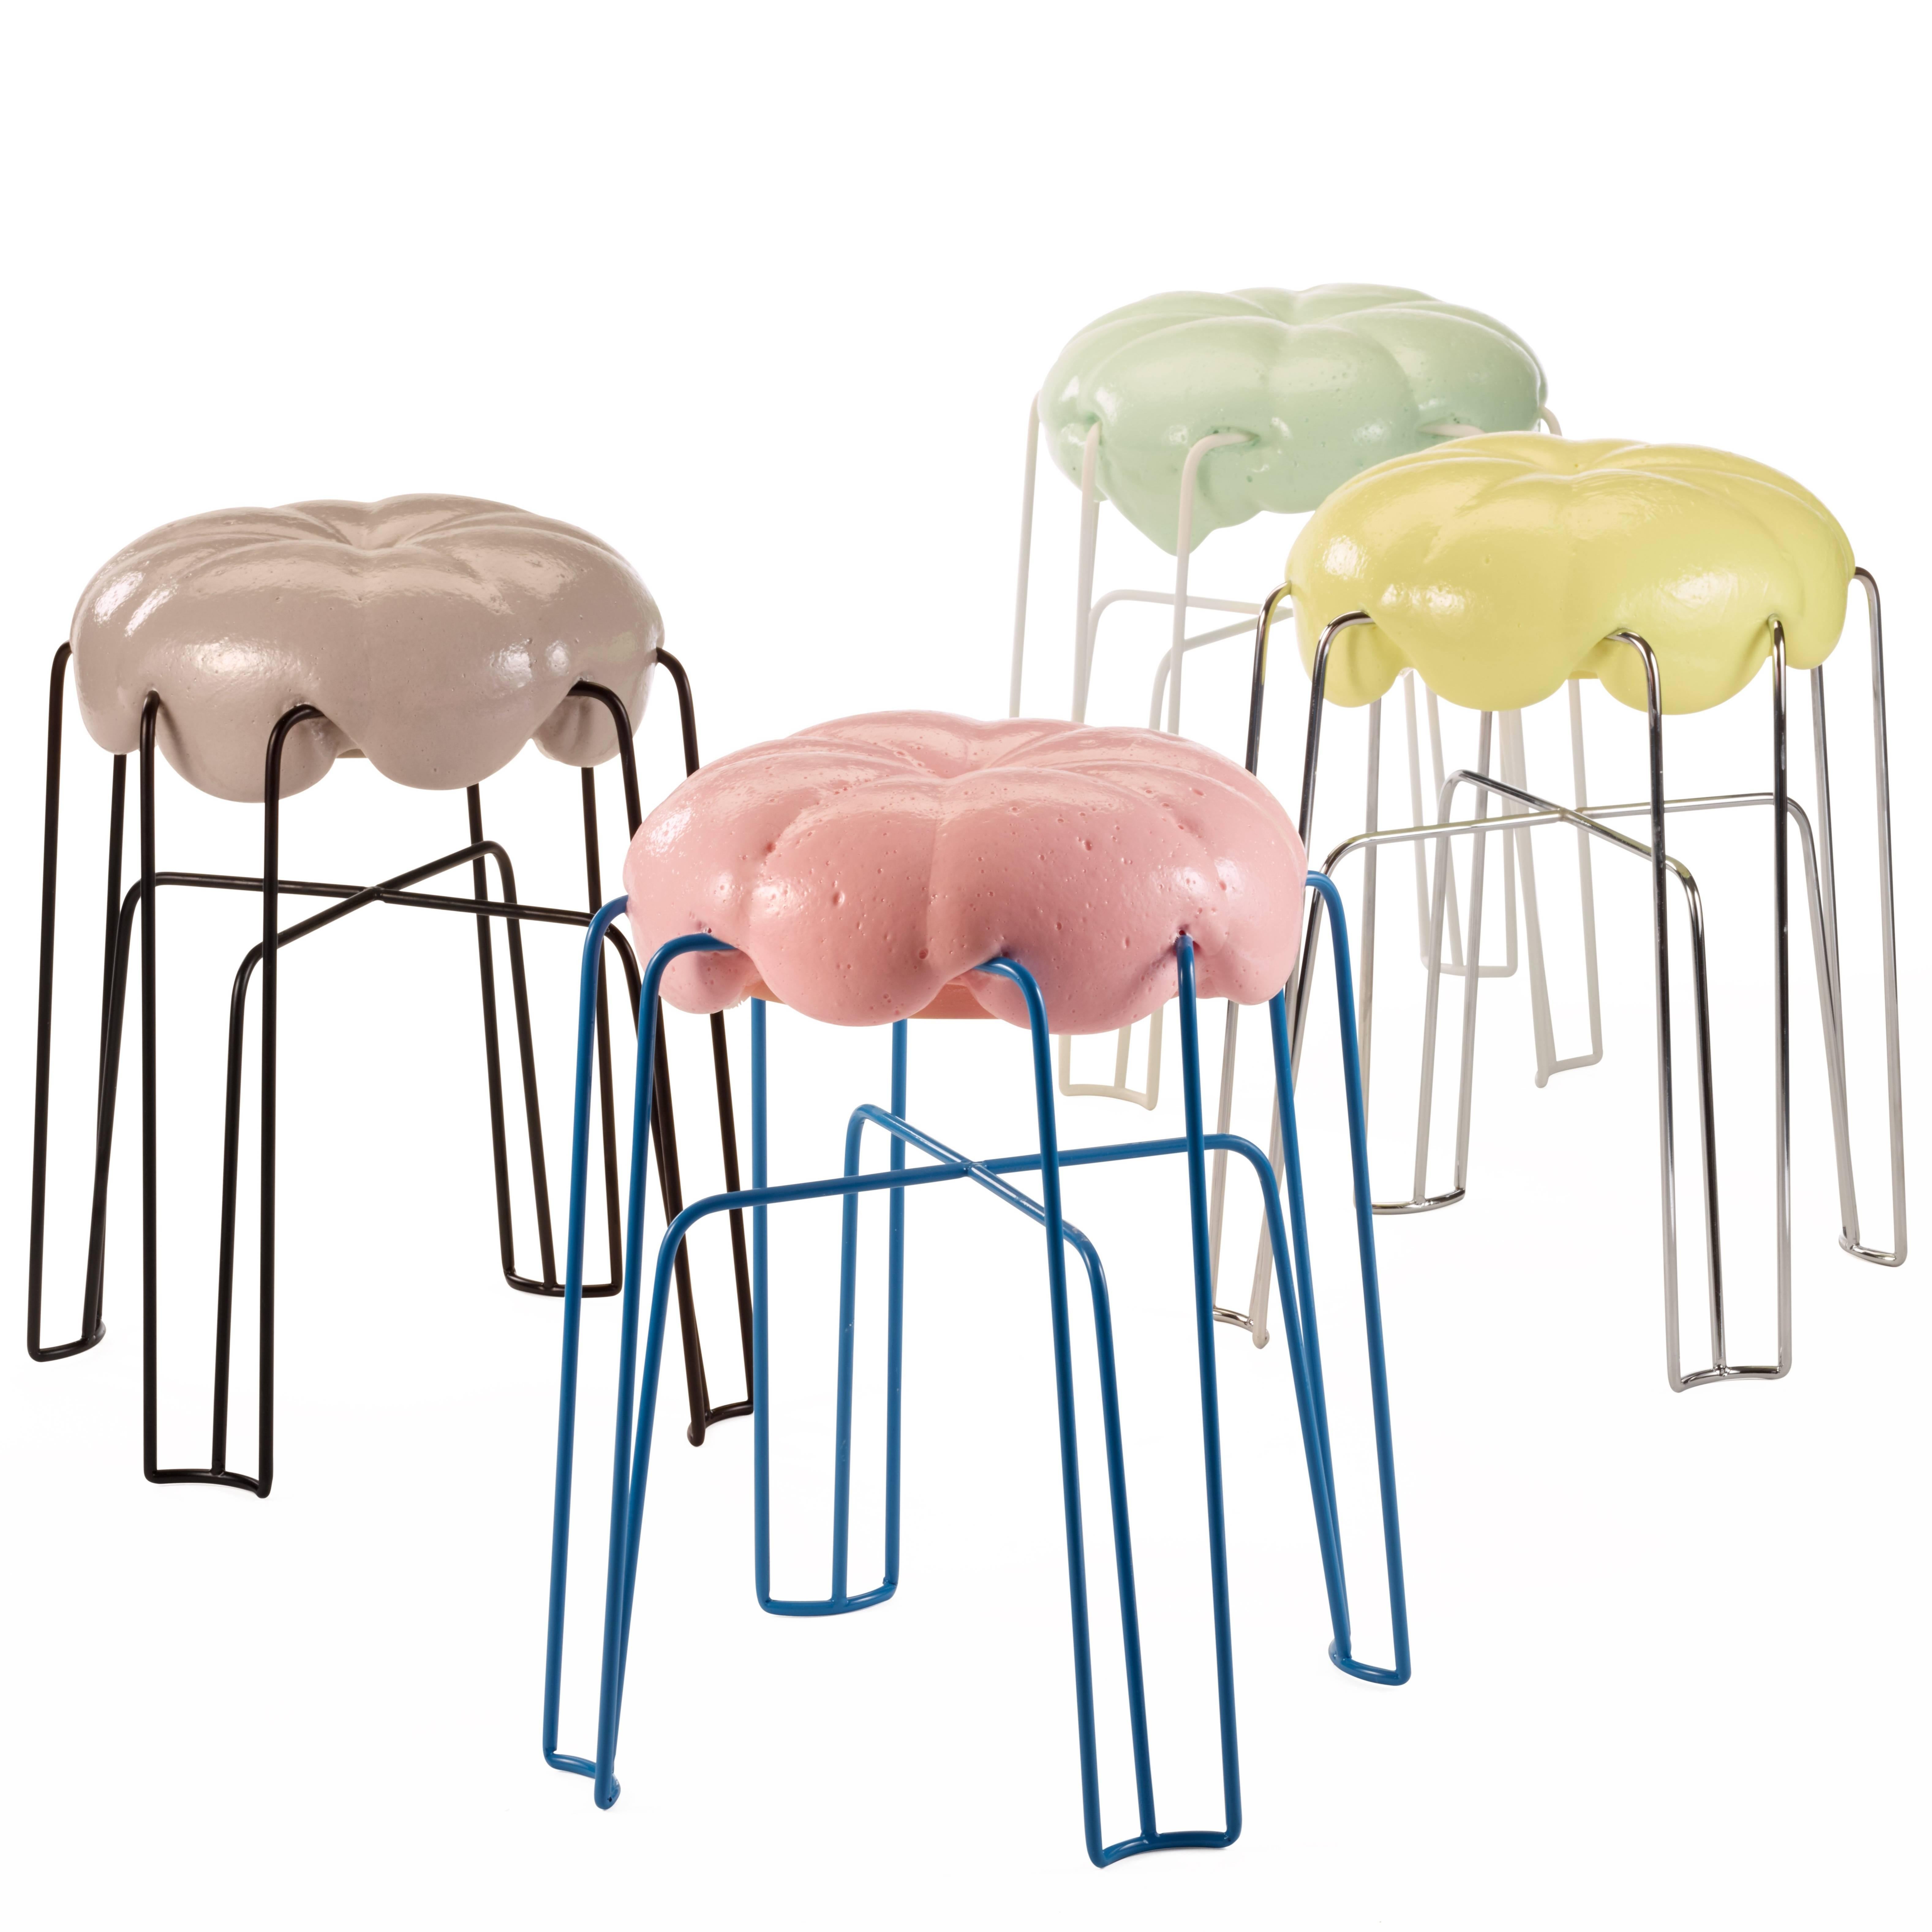 Marshmallow stool by Paul Ketz in sugarpink polyurethane foam and steel

Designed by Paul Ketz
Contemporary, Germany, 2016
Polyurethane Foam (non-toxic, UV stabile), steel
Measures: H 19.25 in, W 14.5 in, D 14.5 in

Each stool is unique as there is